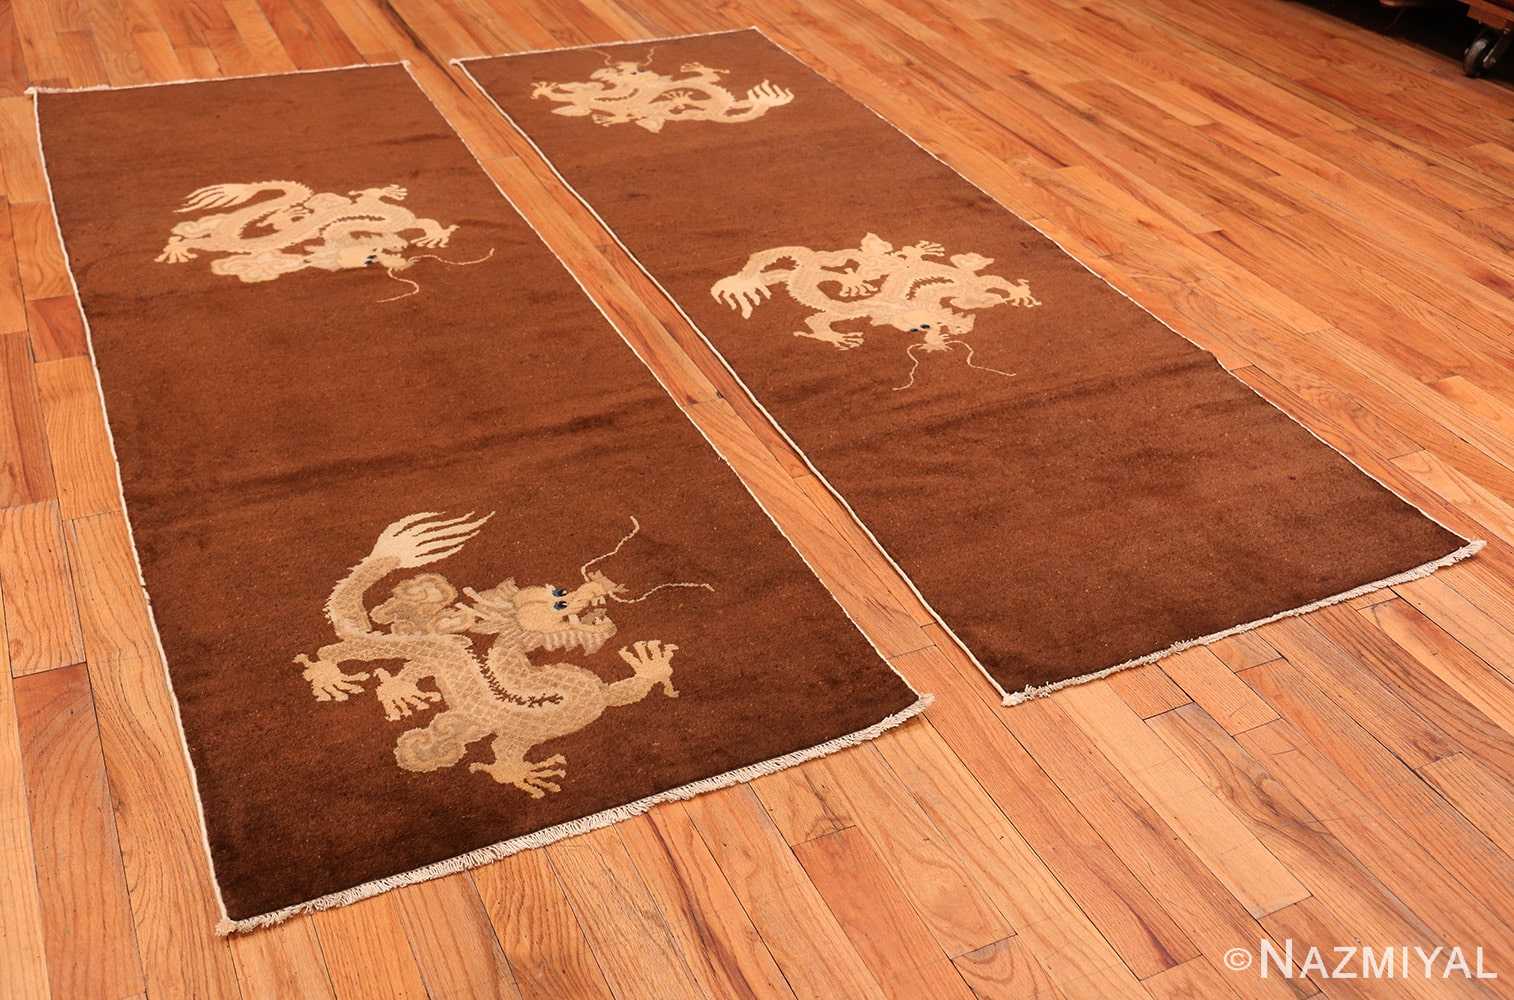 A full picture of dragon image of the antique chinese dragon runner rug #70064 from Nazmiyal Antique Rugs NYC